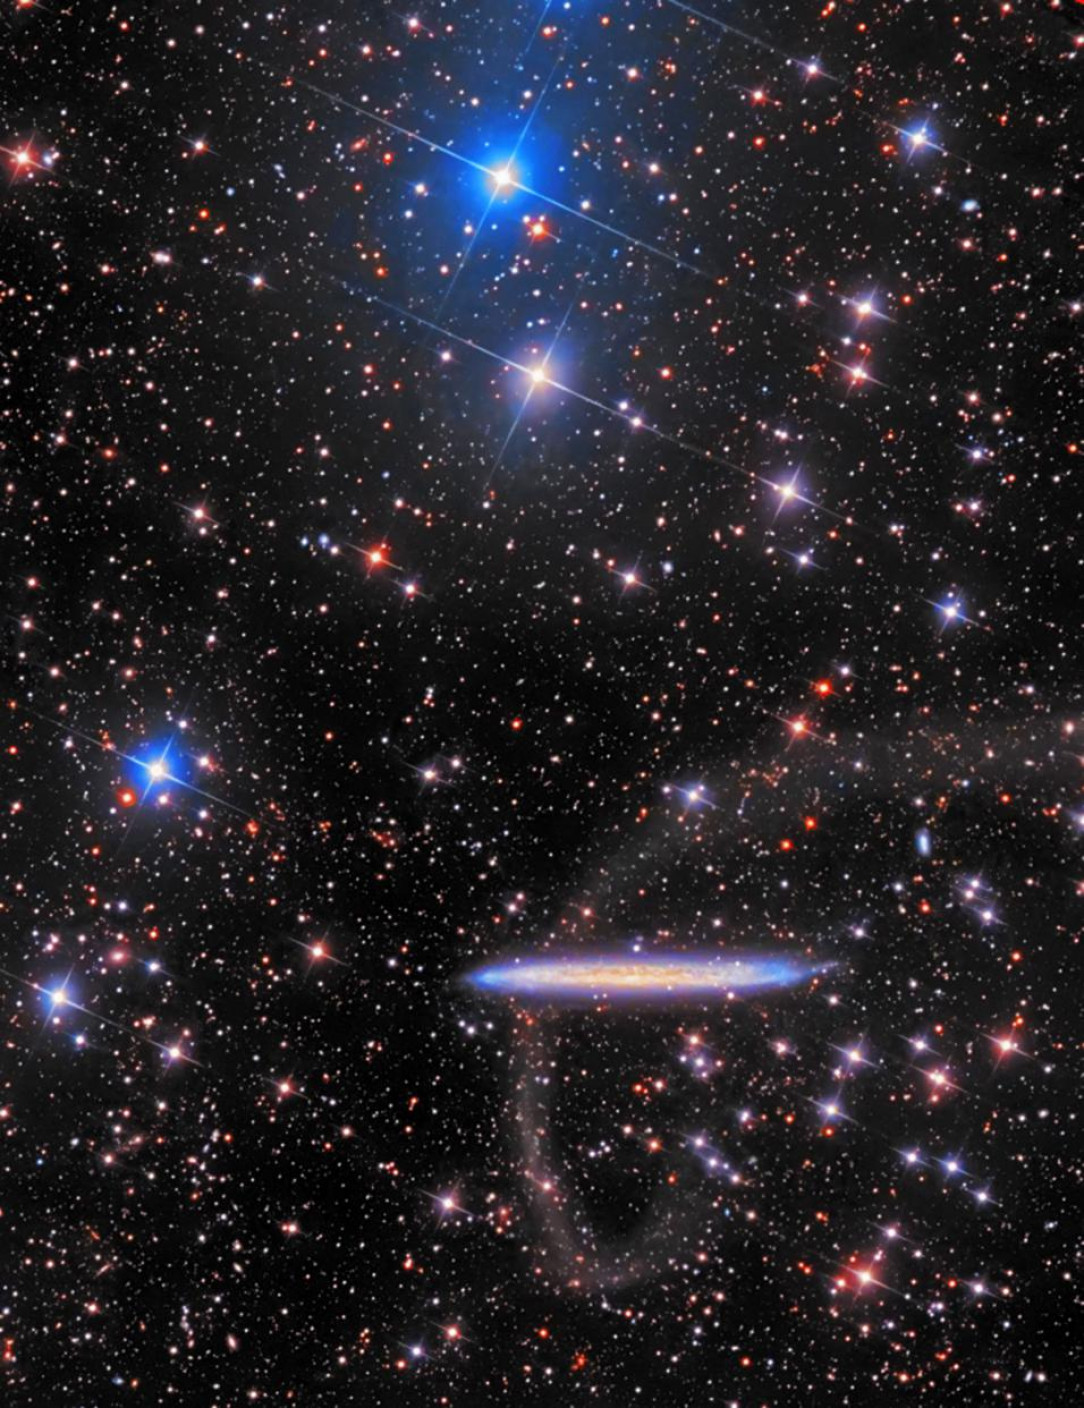 *NGC 5907 with a extremely faint tidal stream shot for more than 25+hrs